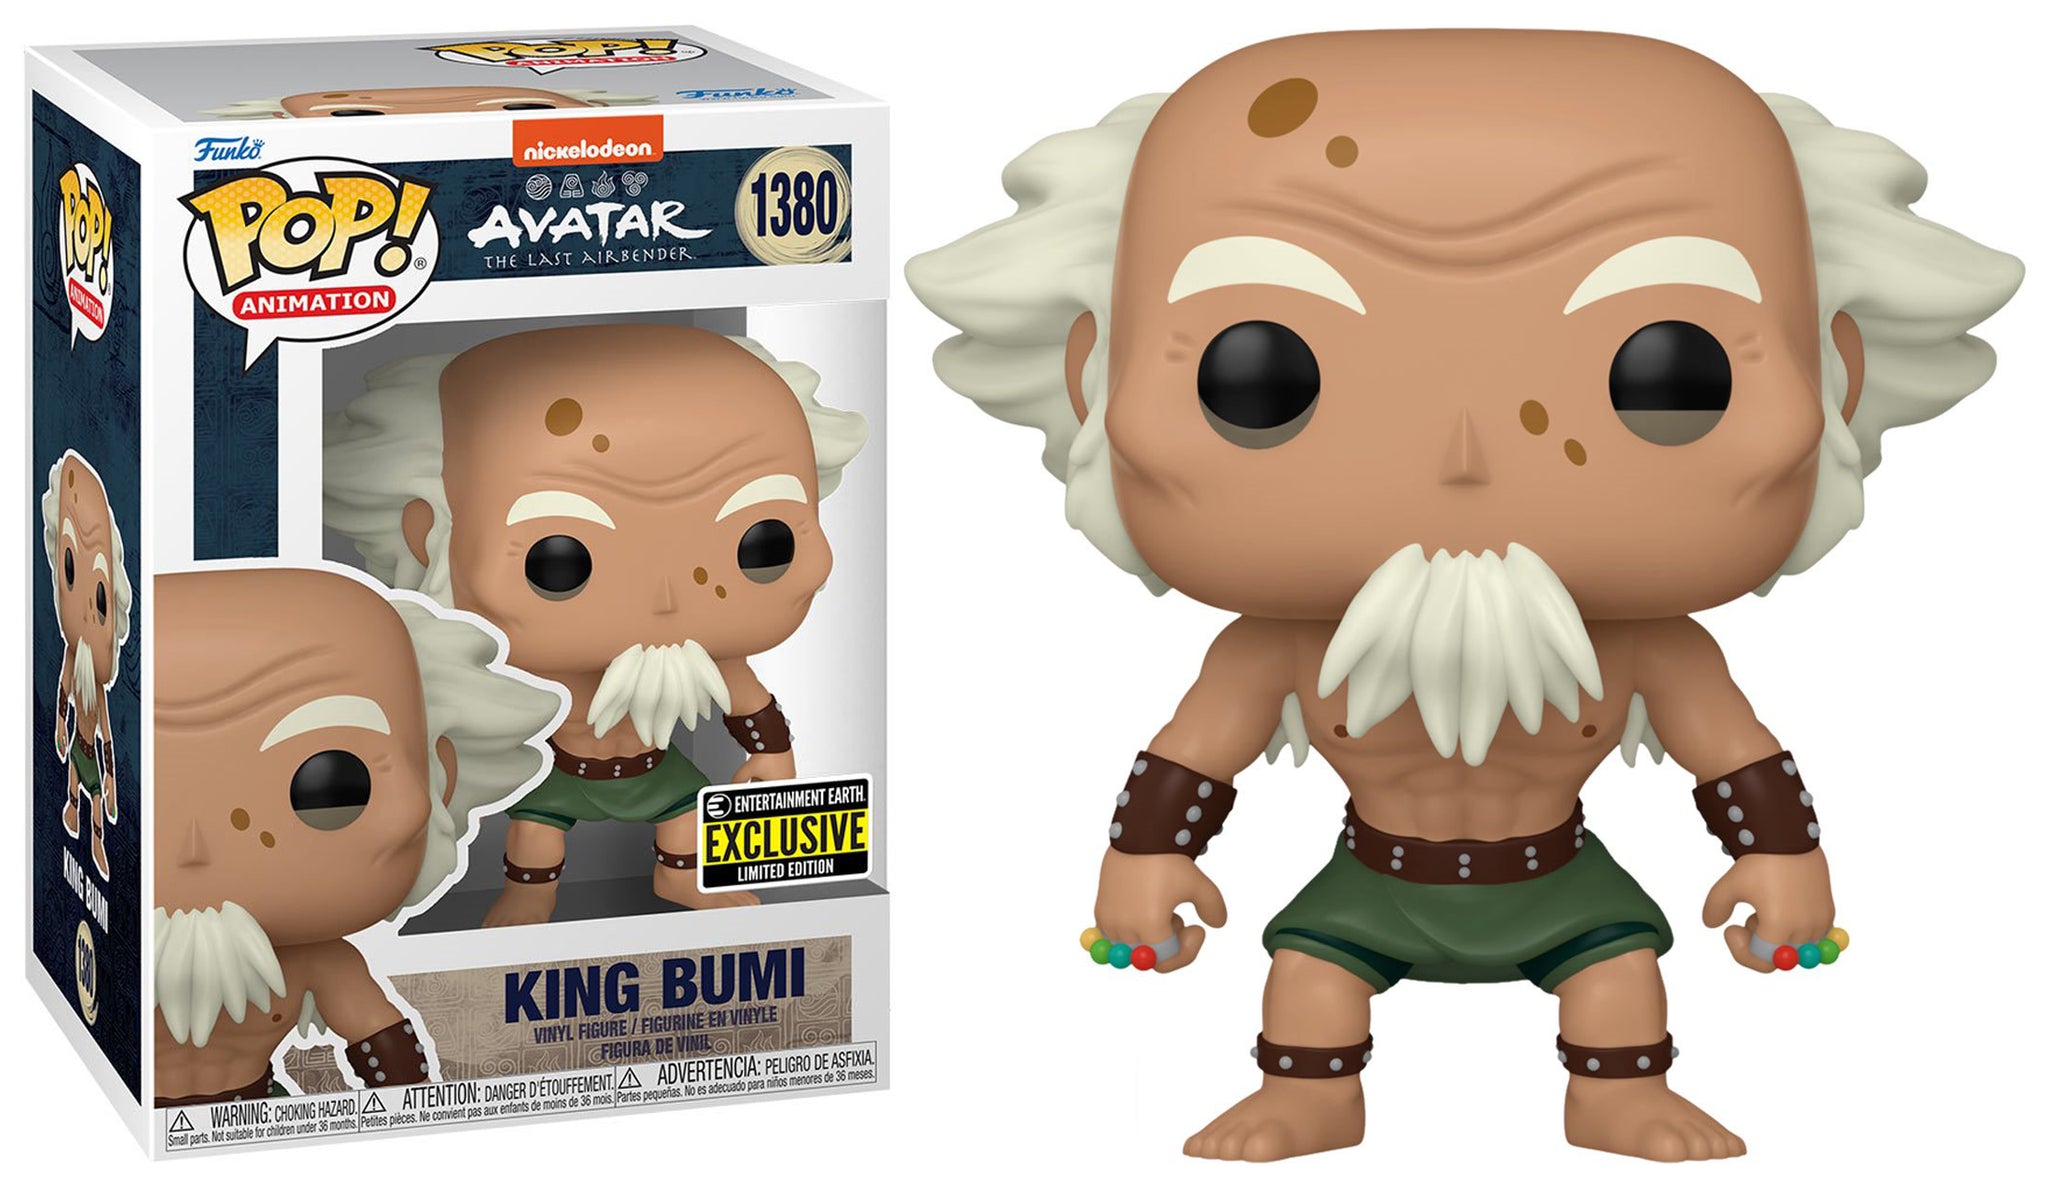  Funko Avatar: The Last Airbender King Bumi Pop! Vinyl Figure  #1380 - Entertainment Earth Exclusive : Toys & Games